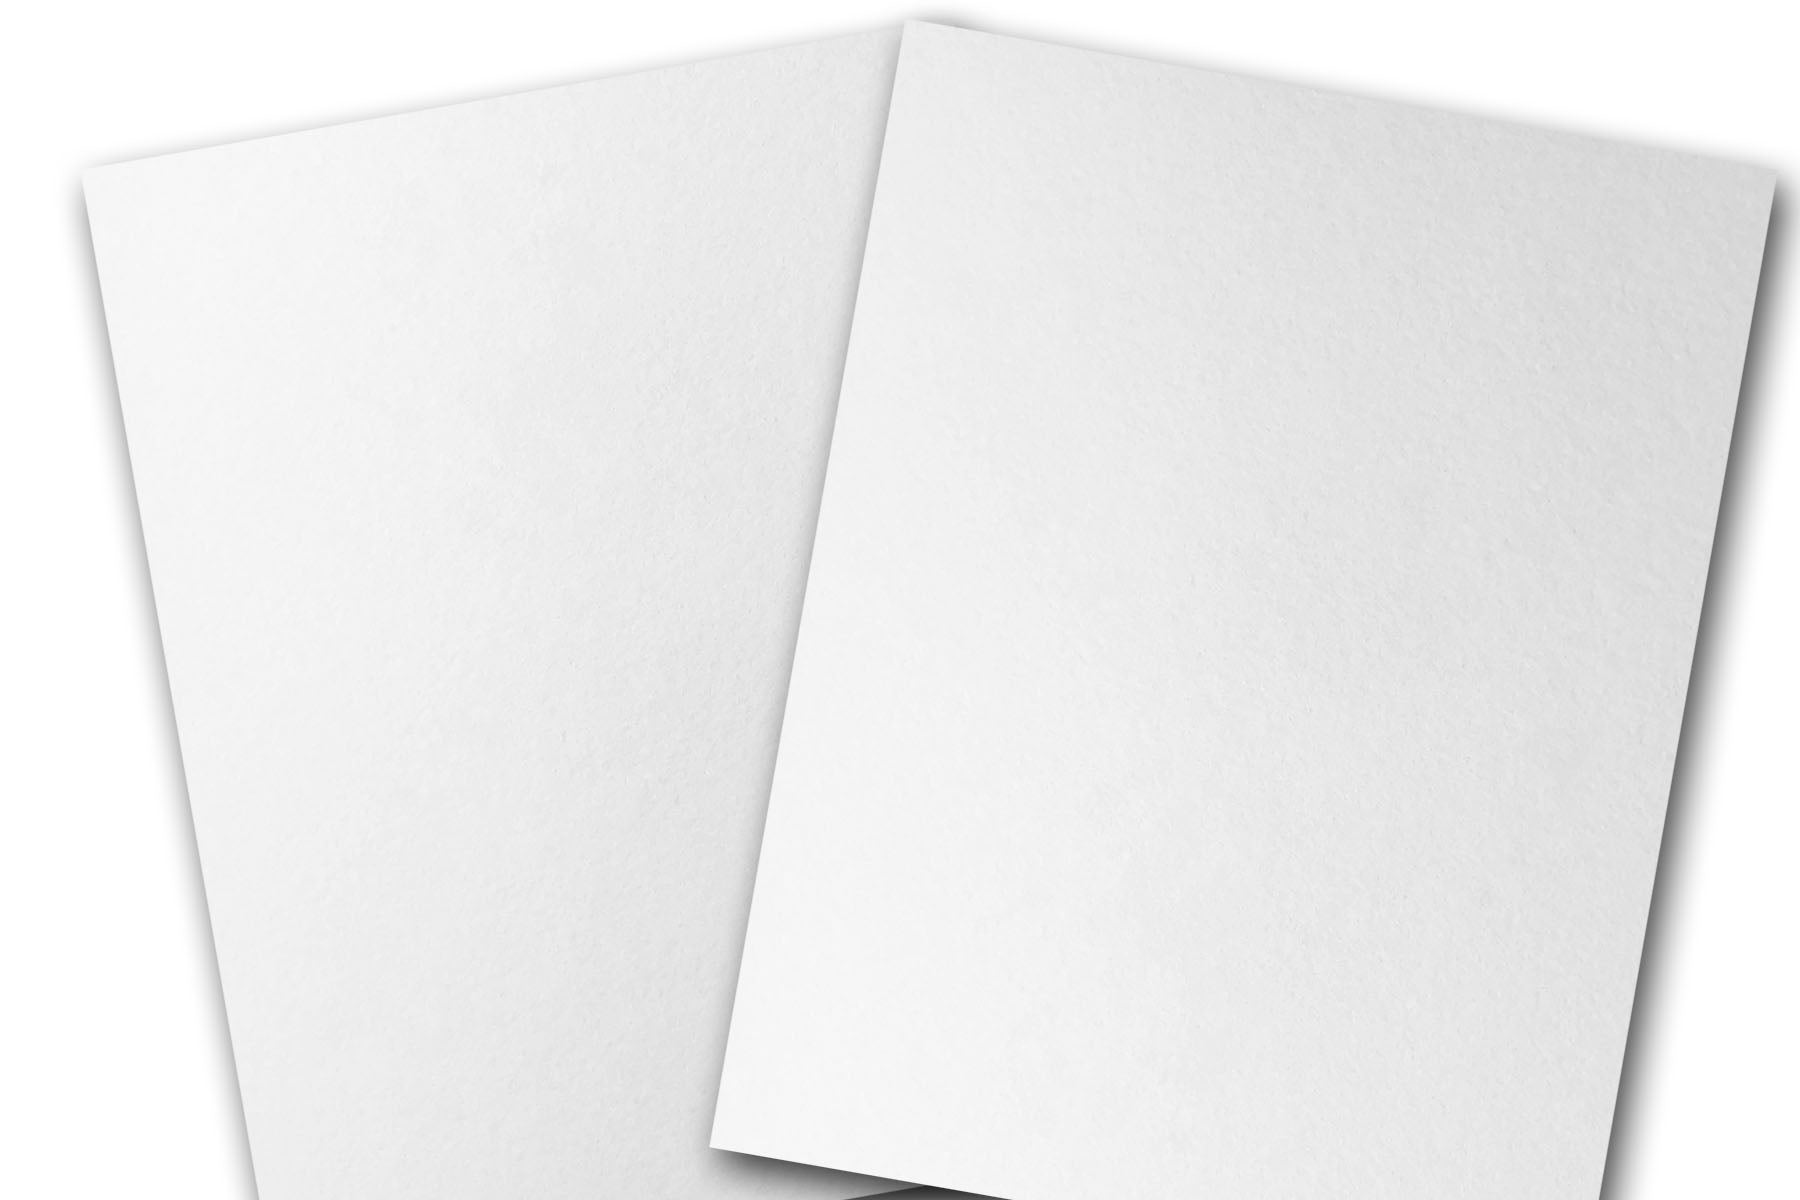 Cotton A2 FOLDED Blank Discount Card Stock for letterpress and cards -  CutCardStock